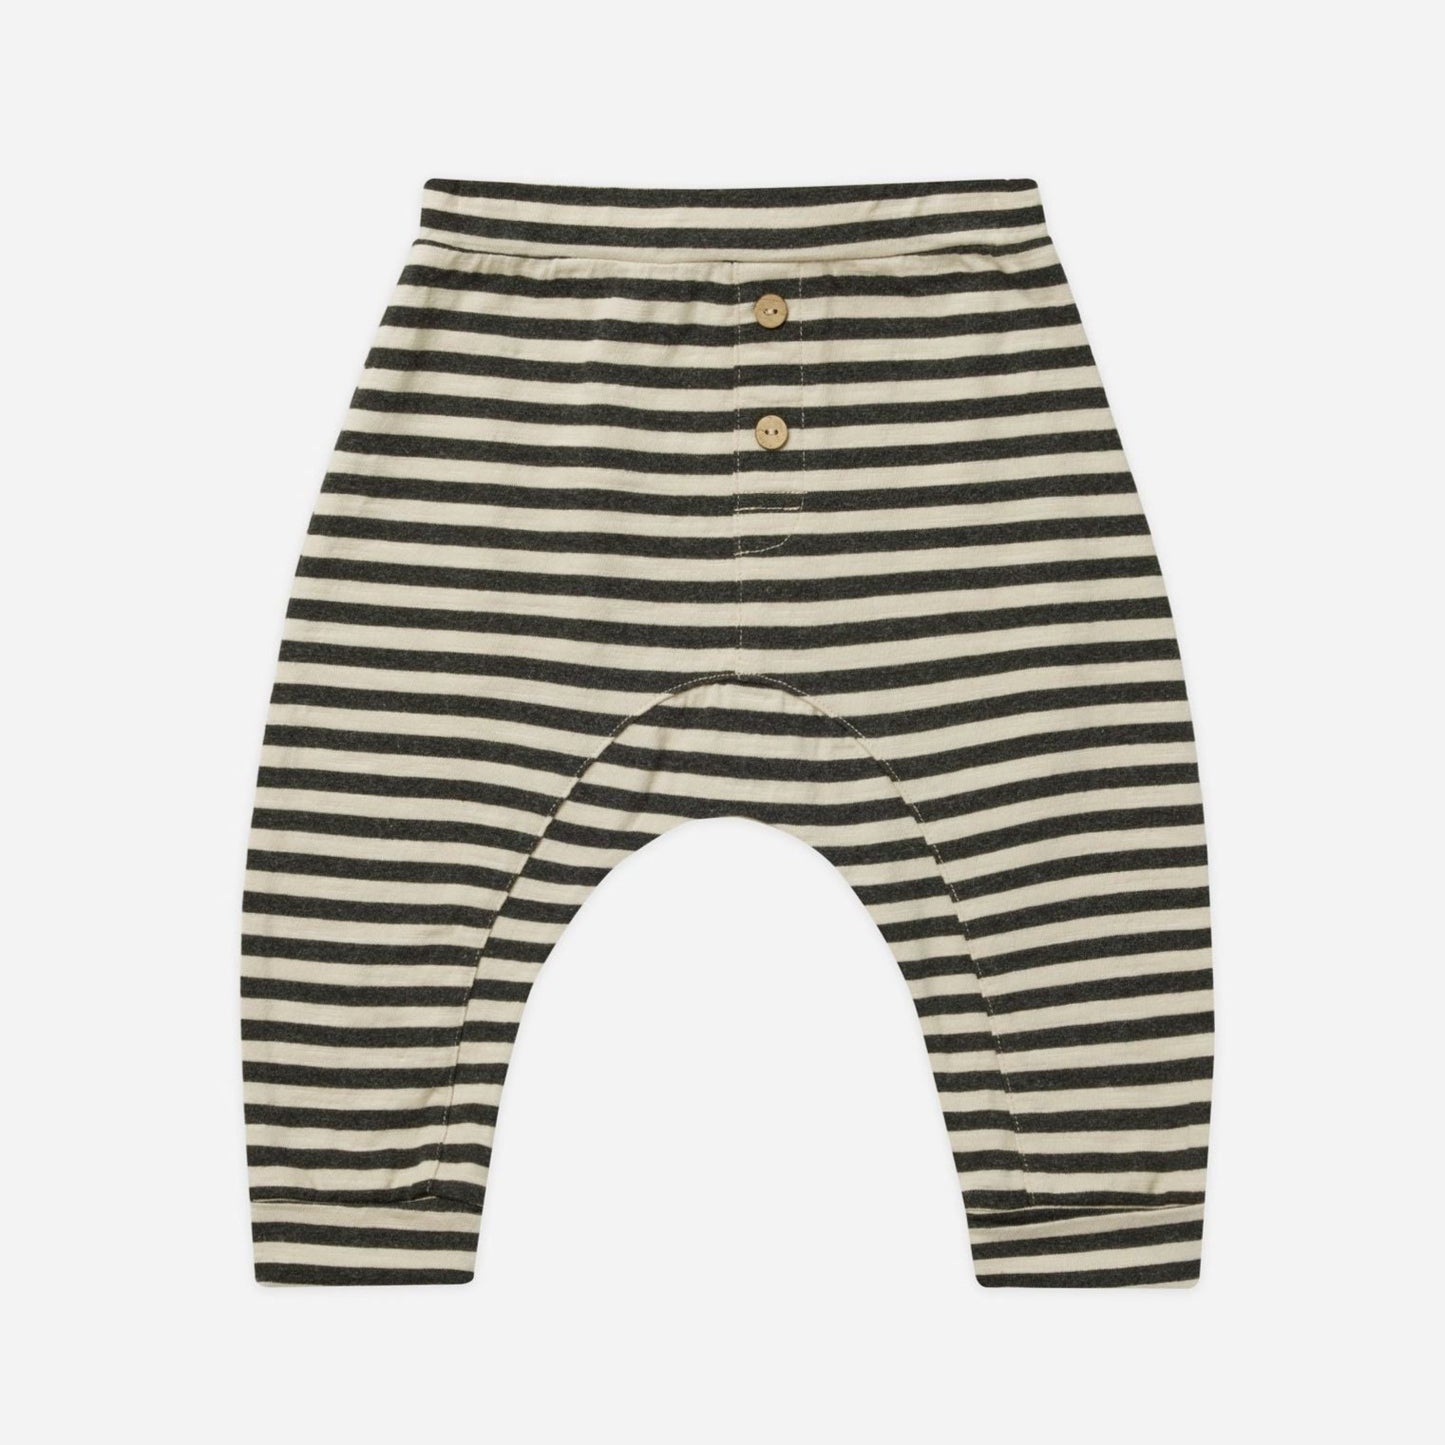 Baby Cru Pant || Black Stripe - Rylee + Cru | Kids Clothes | Trendy Baby Clothes | Modern Infant Outfits |